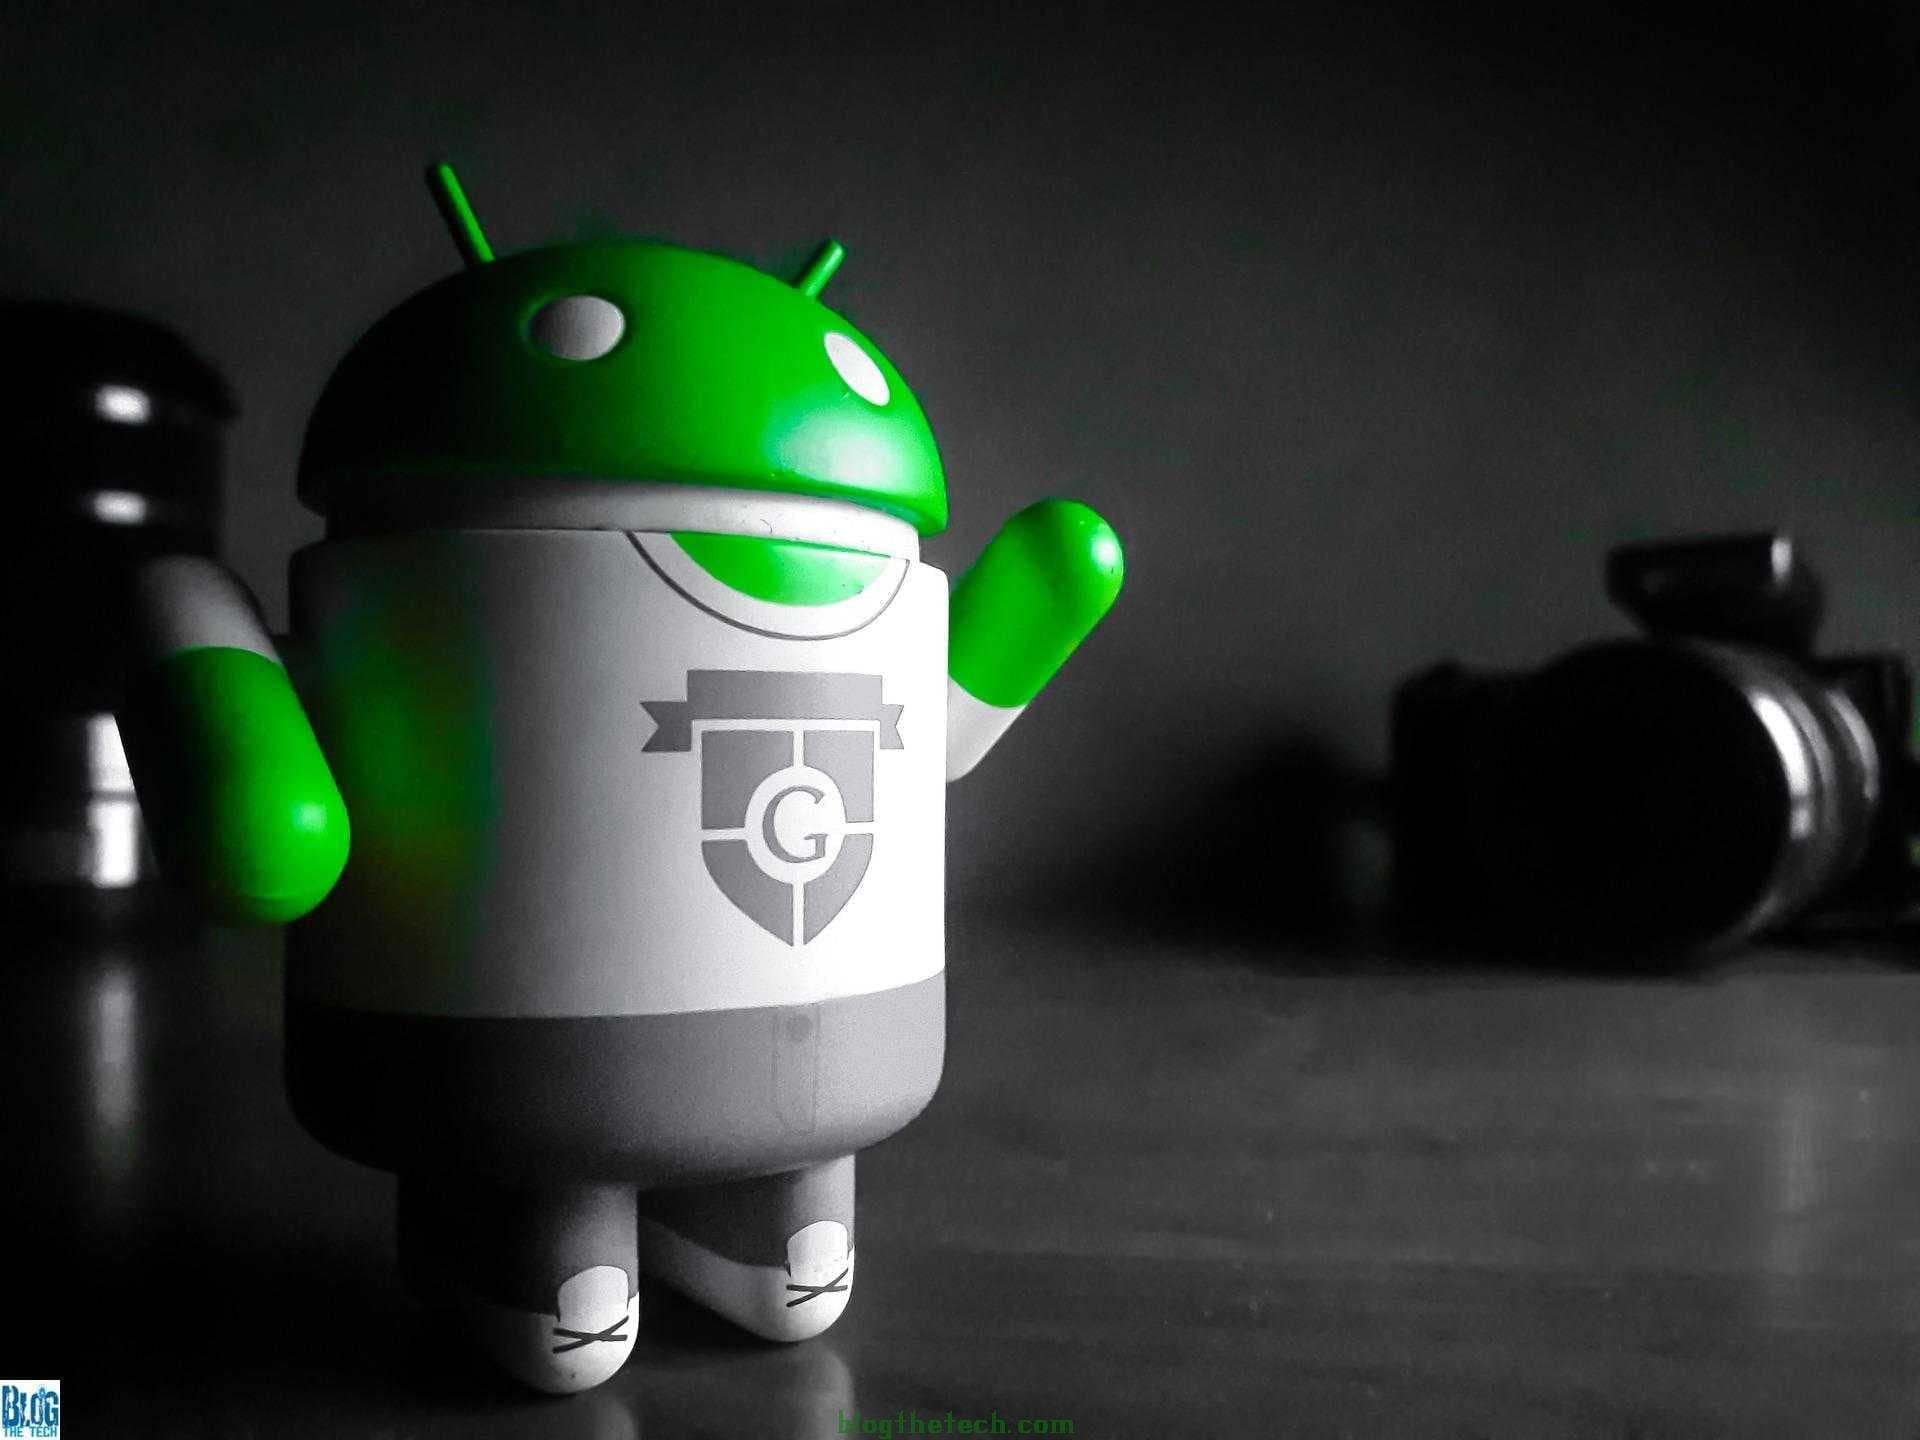 How to install ROM on Android using MSMDownload Tool